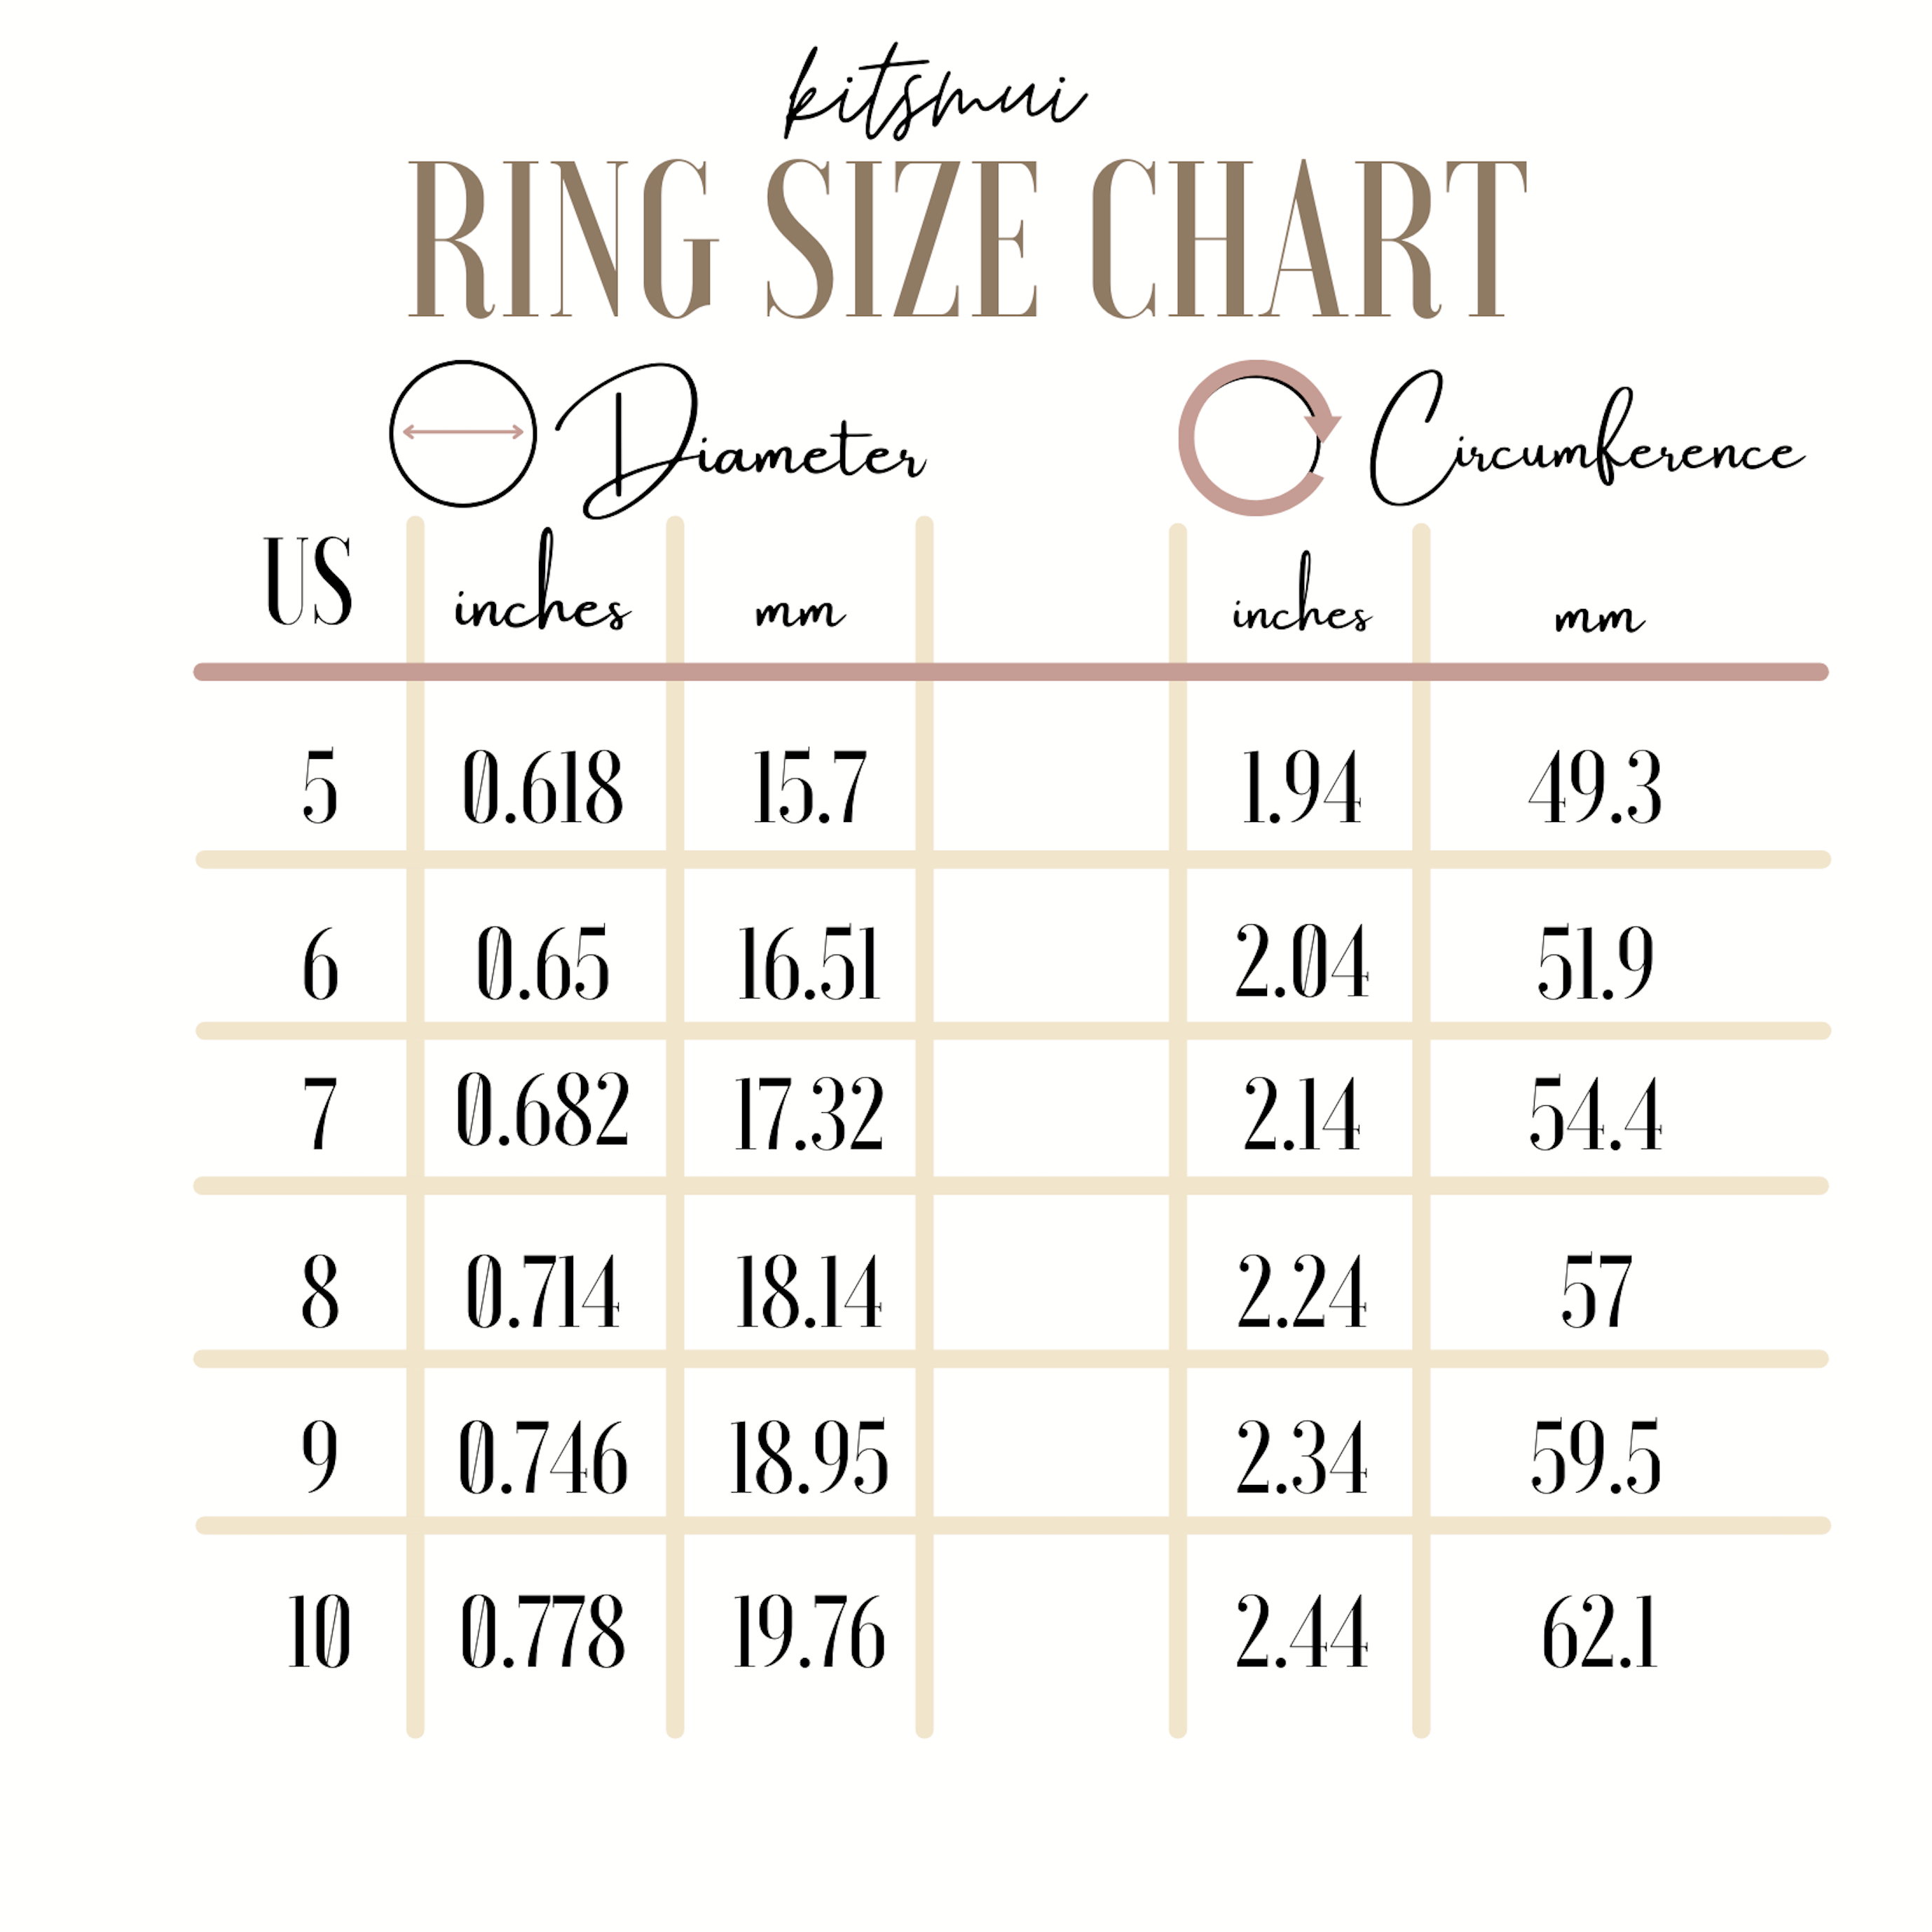 indian ring size chart - Google Search | Indian rings, Ring sizes chart, Ring  size